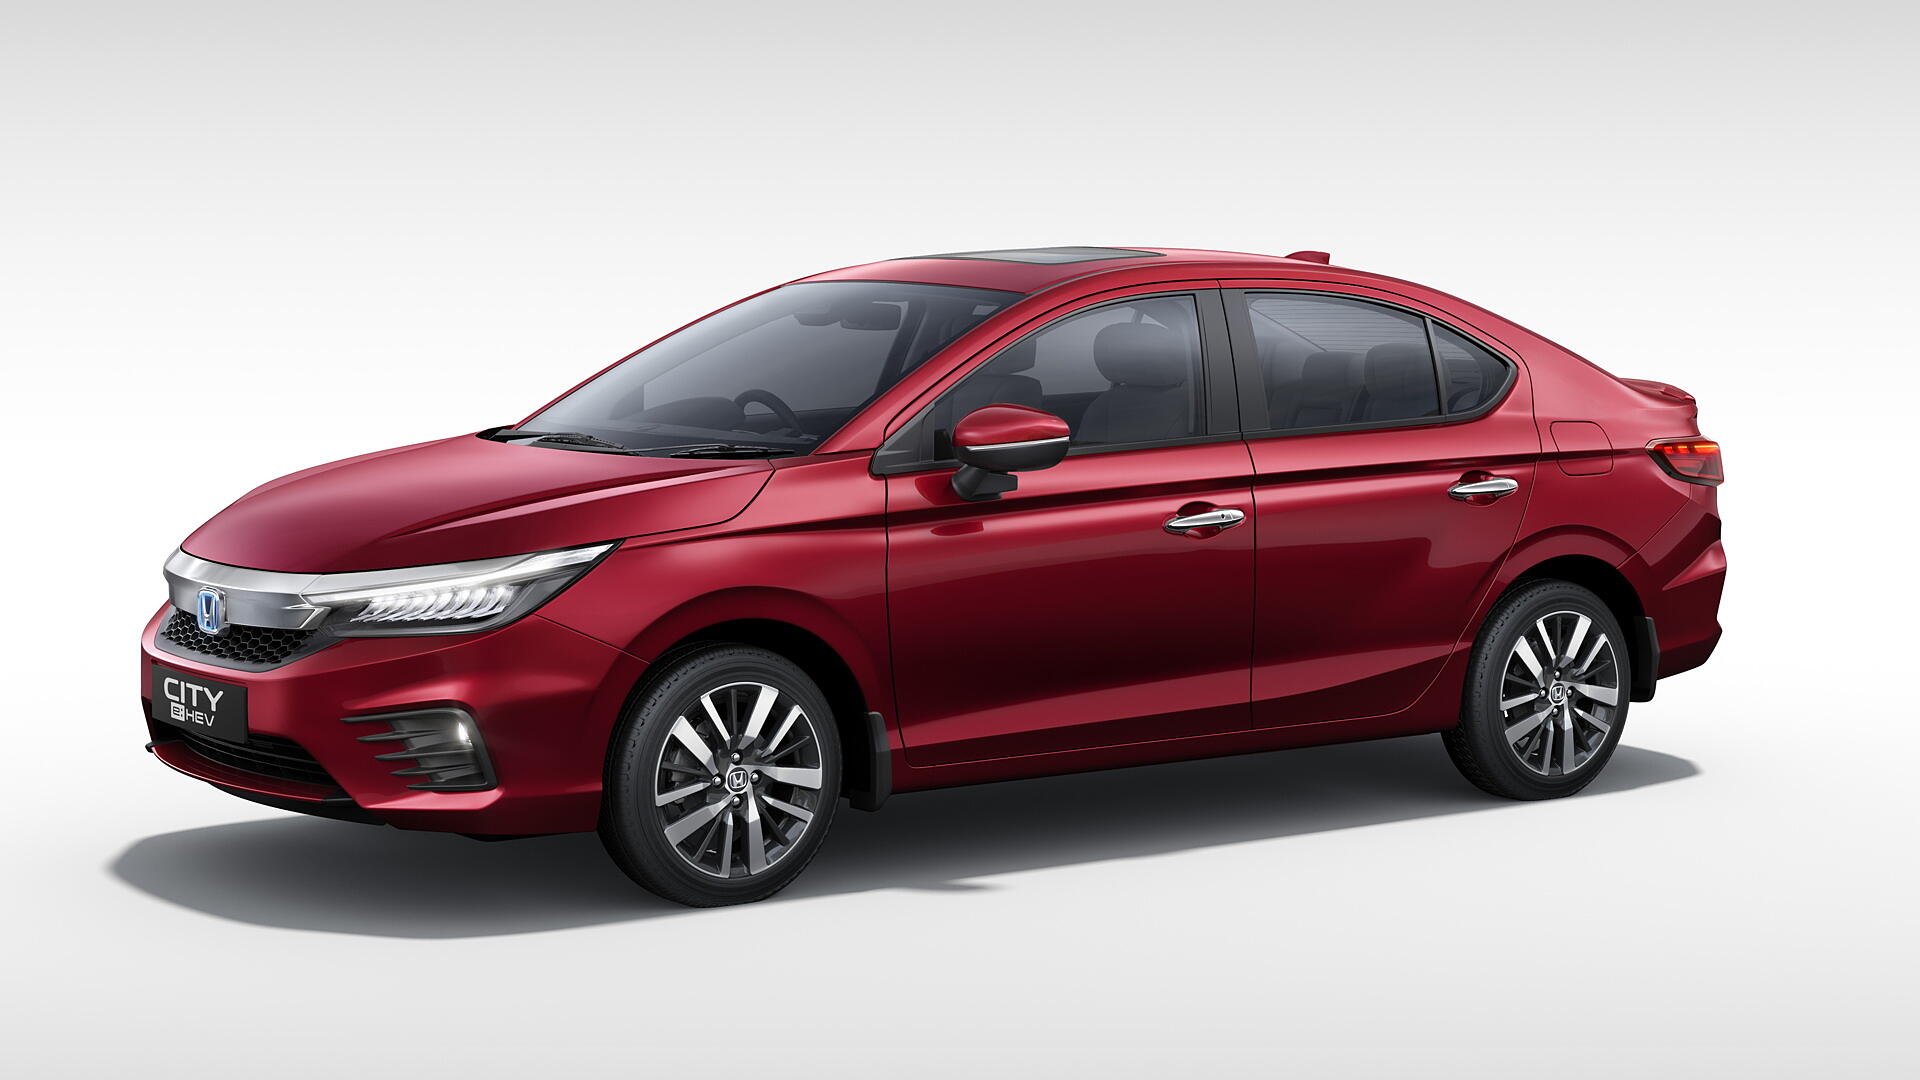 New Honda City e:HEV hybrid unveiled – All you need to know - CarWale